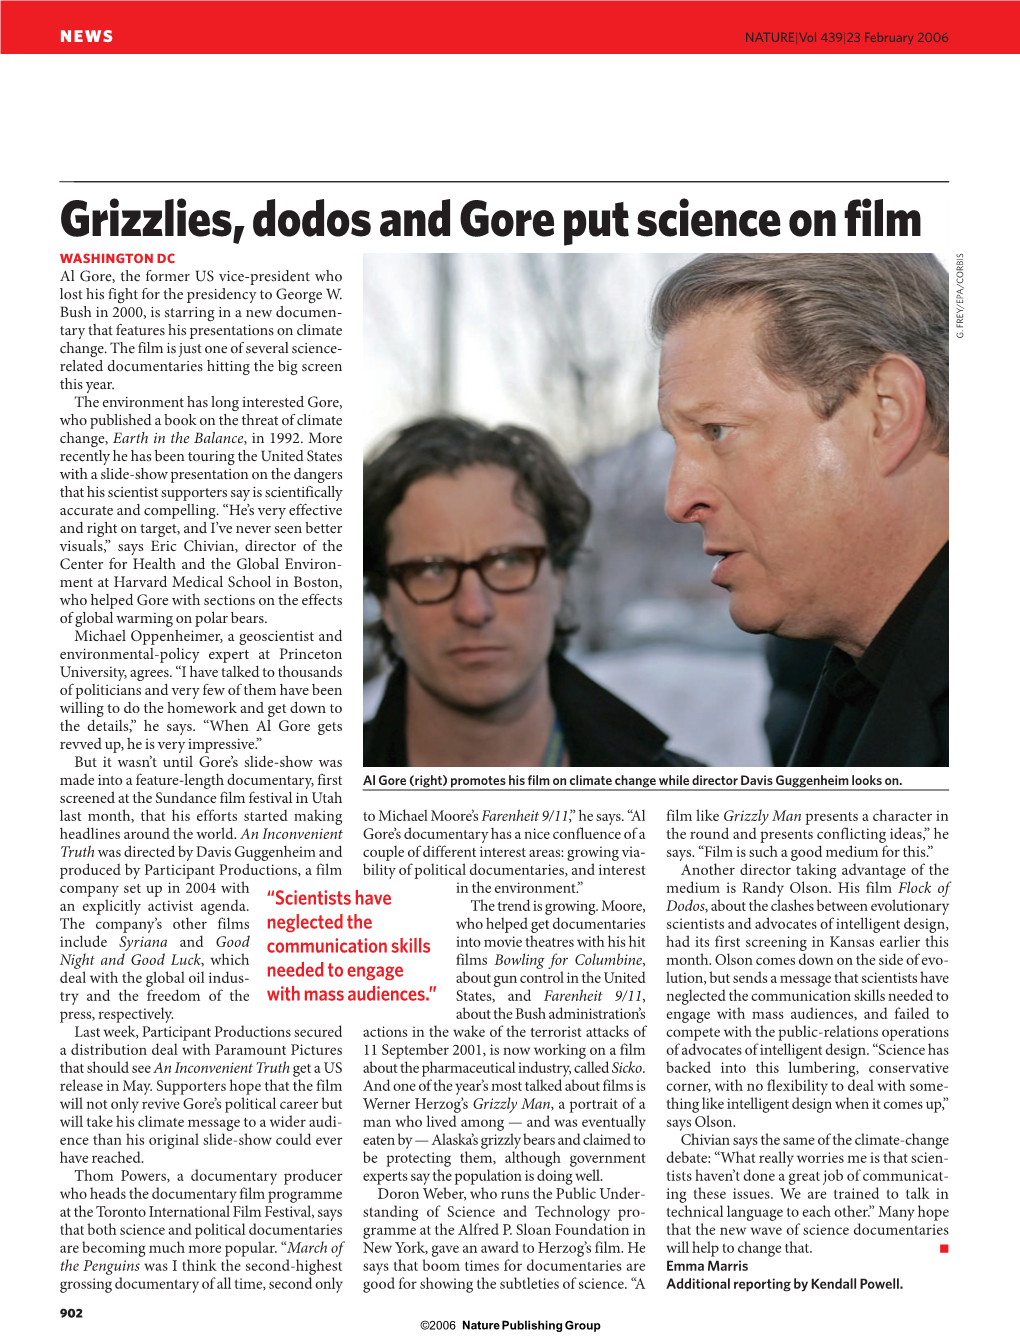 Grizzlies, Dodos and Gore Put Science on Film WASHINGTON DC Al Gore, the Former US Vice-President Who Lost His Fight for the Presidency to George W